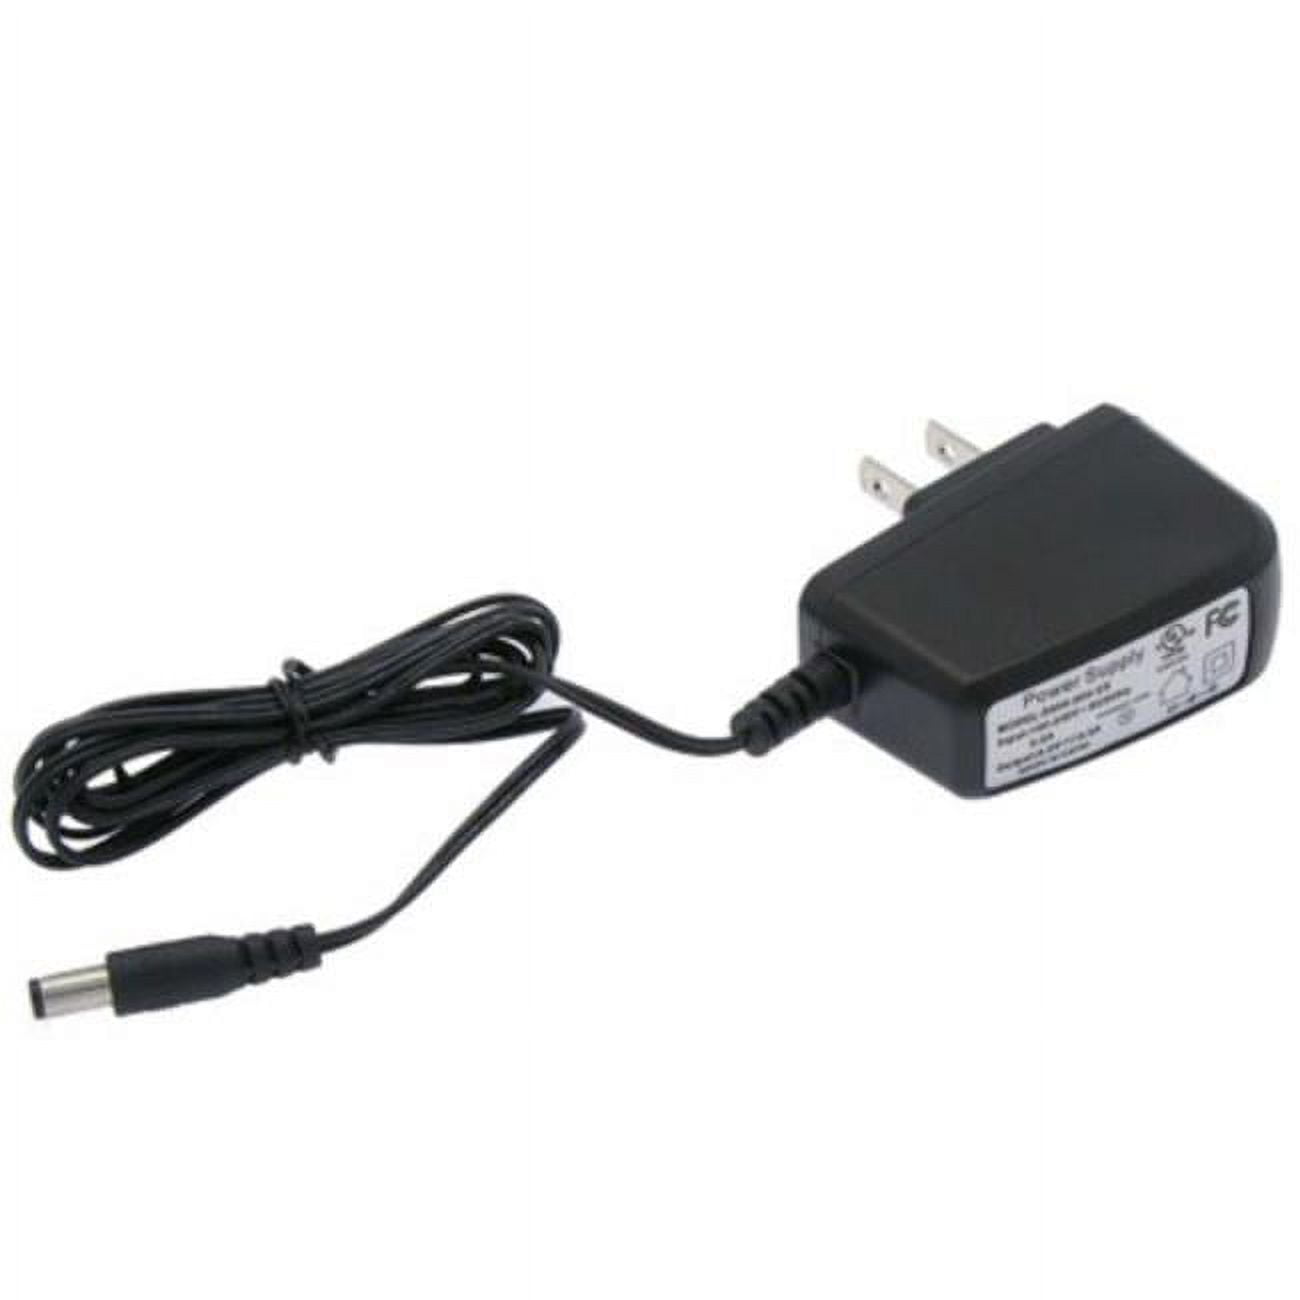 Picture of CableWholesale 90W1-61003 DC Power Adapter - 5V & 500mA - 2.1-5.5mm Plug - AC100-240V to DC 5V